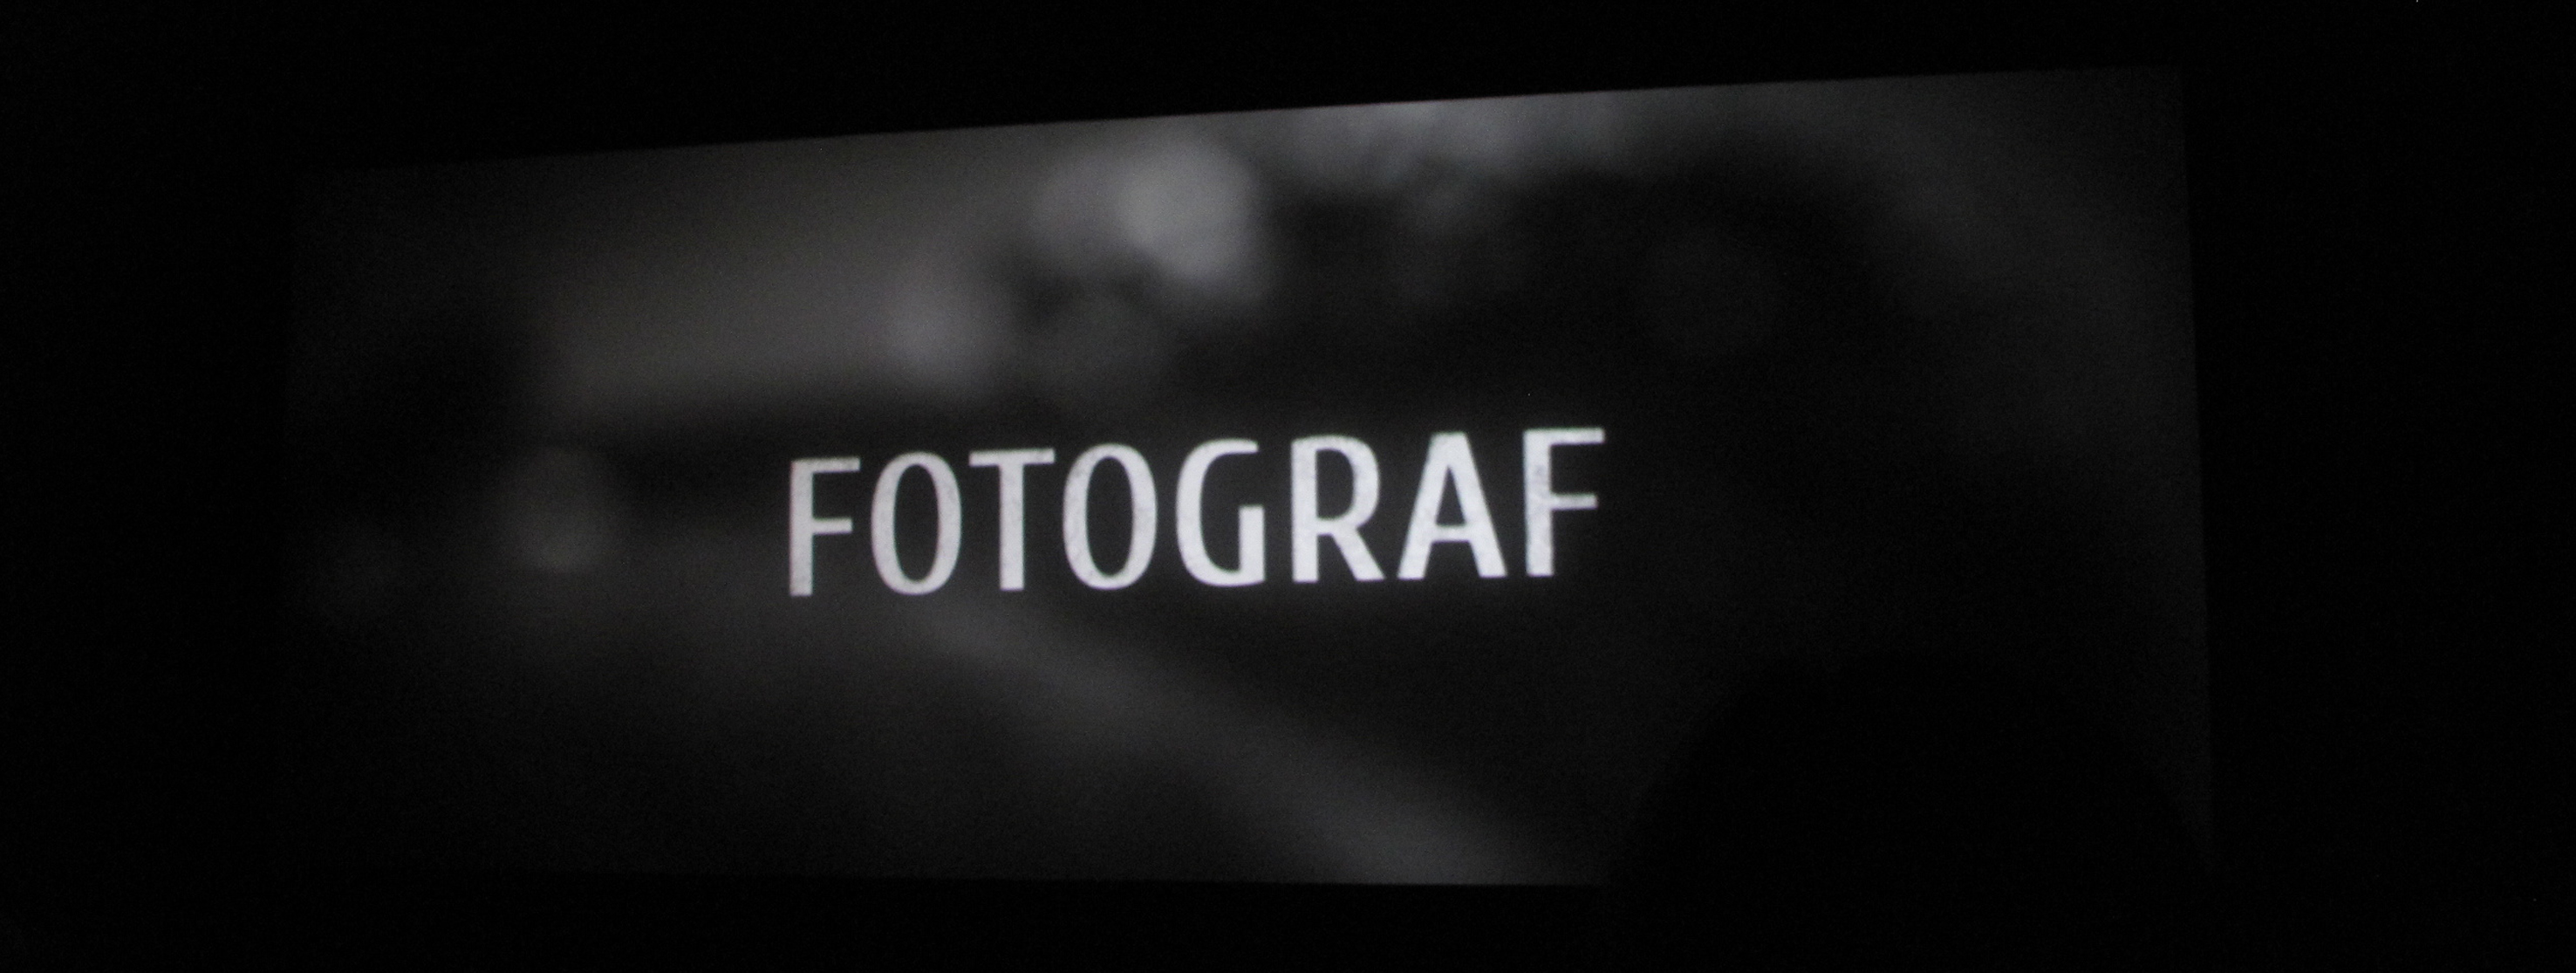 'Fotograf' (The Photographer) premiere in Poland